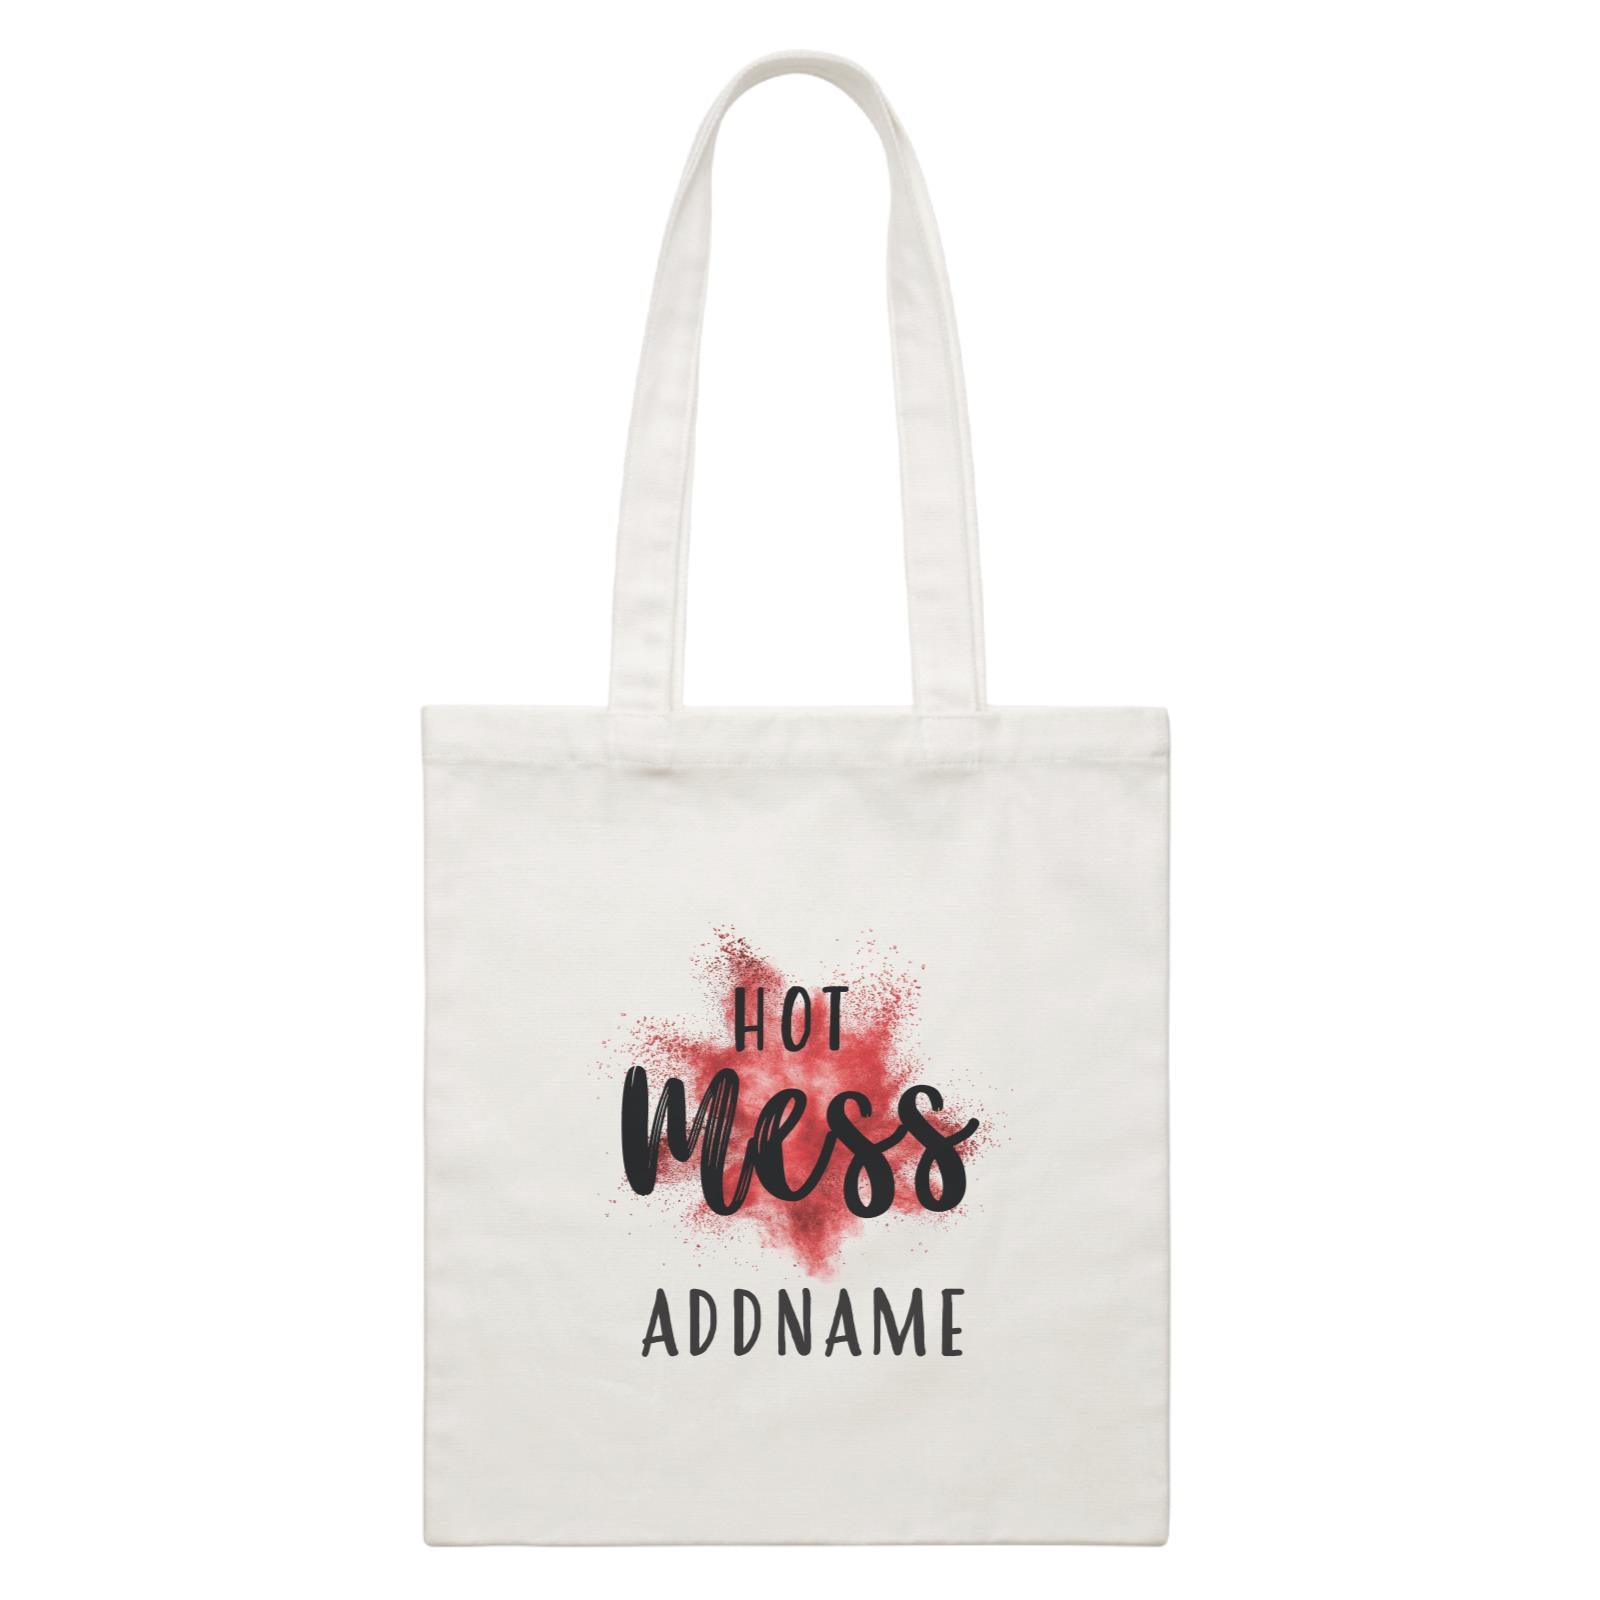 Make Up Quotes Hot Mess Addname White Canvas Bag